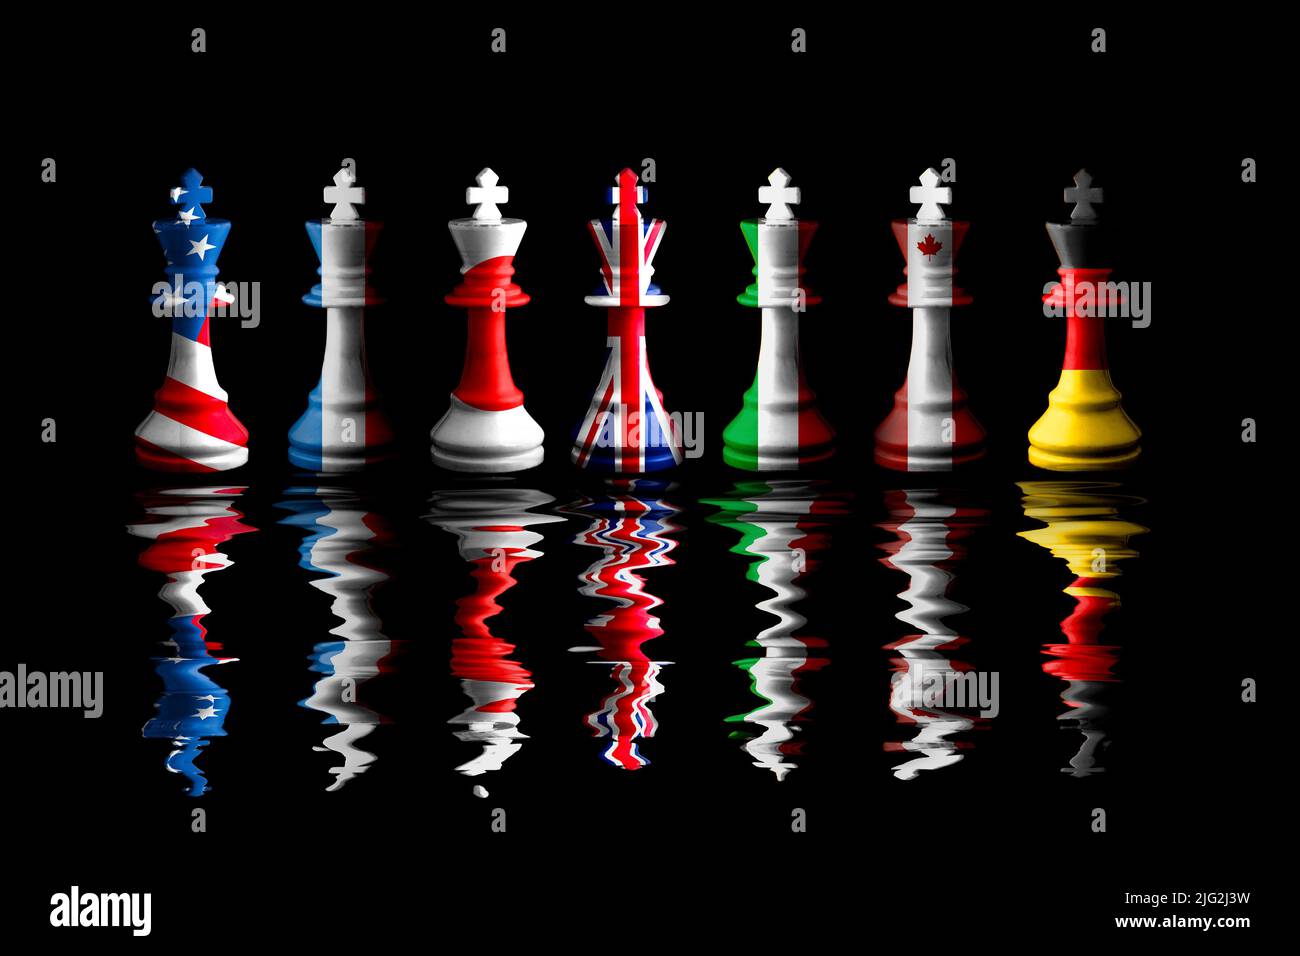 Flag of G7 countries paint over on king chess with black background. G7 are includes USA, Germany, Japan, Canada, France, United Kingdom and Italy. Stock Photo